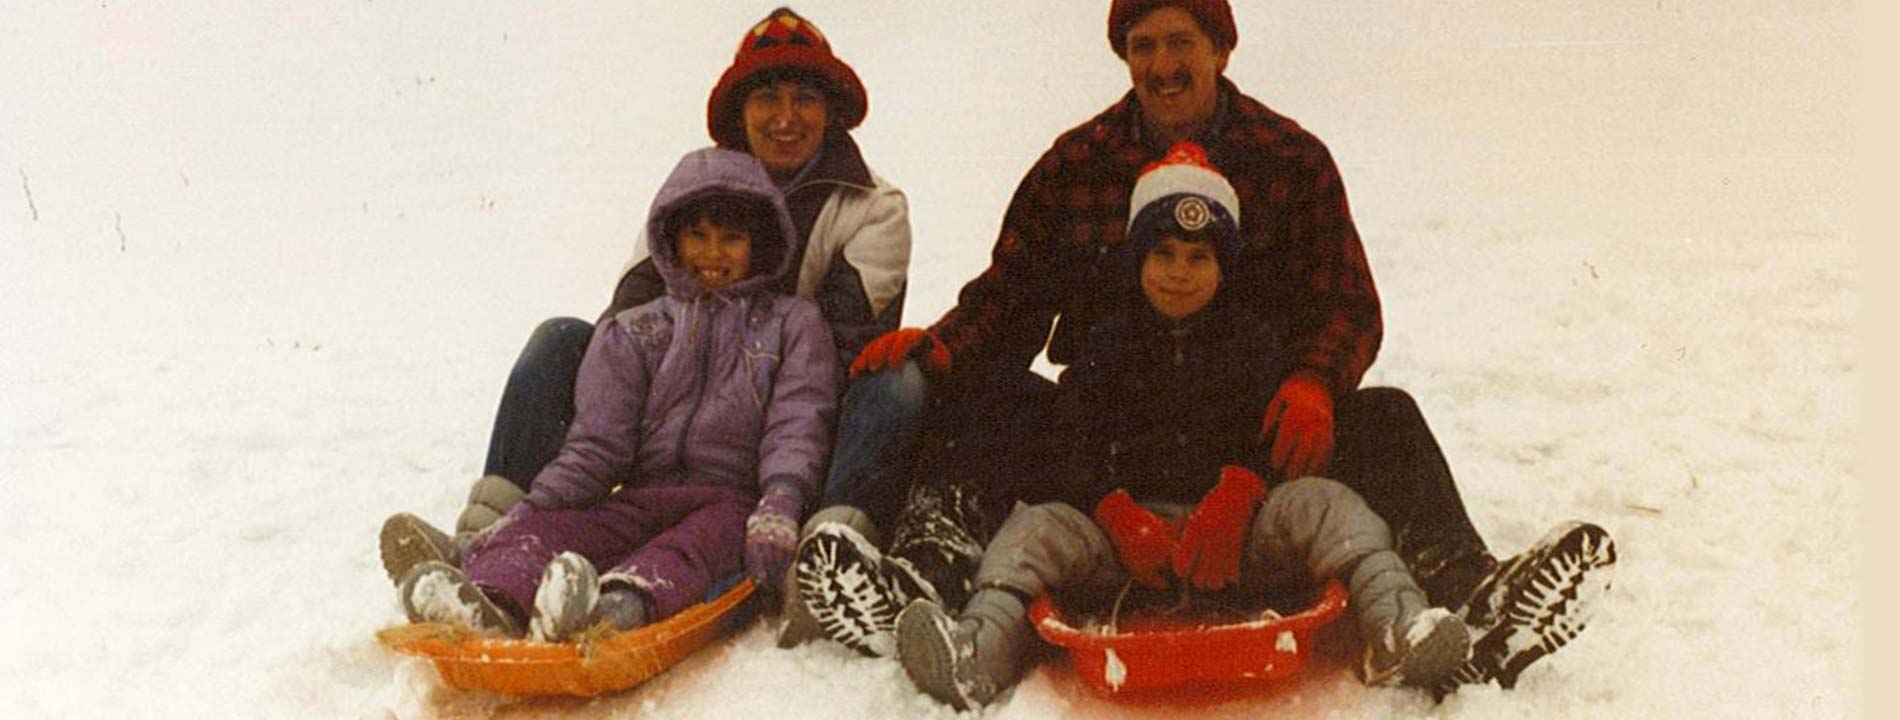 Young Ryan Smoker with his family on sleds